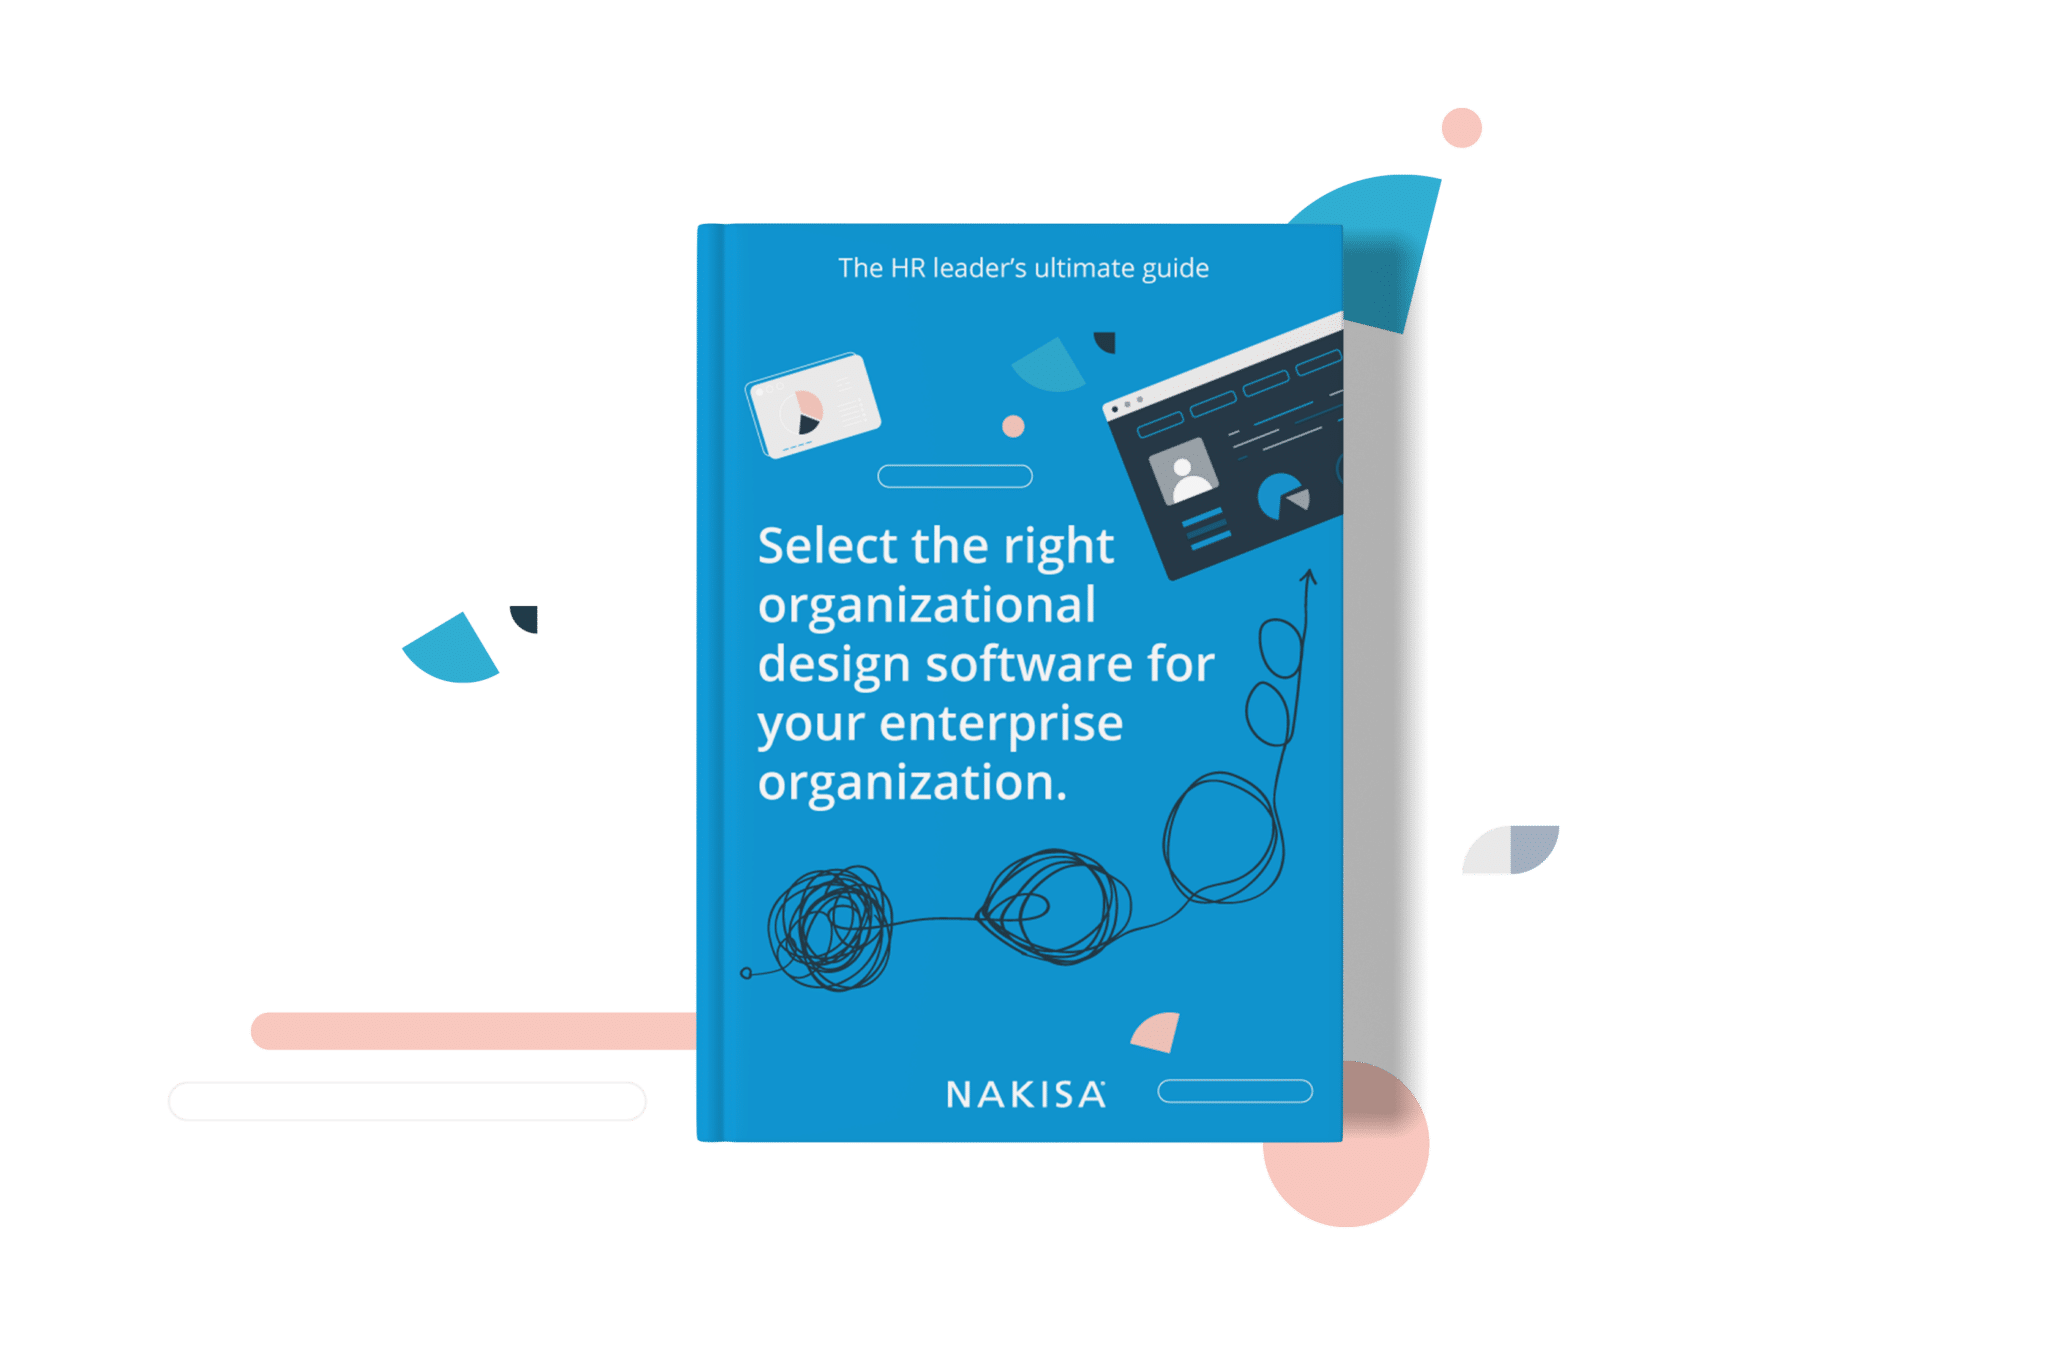 The HR leader’s ultimate guide to selecting organizational design software